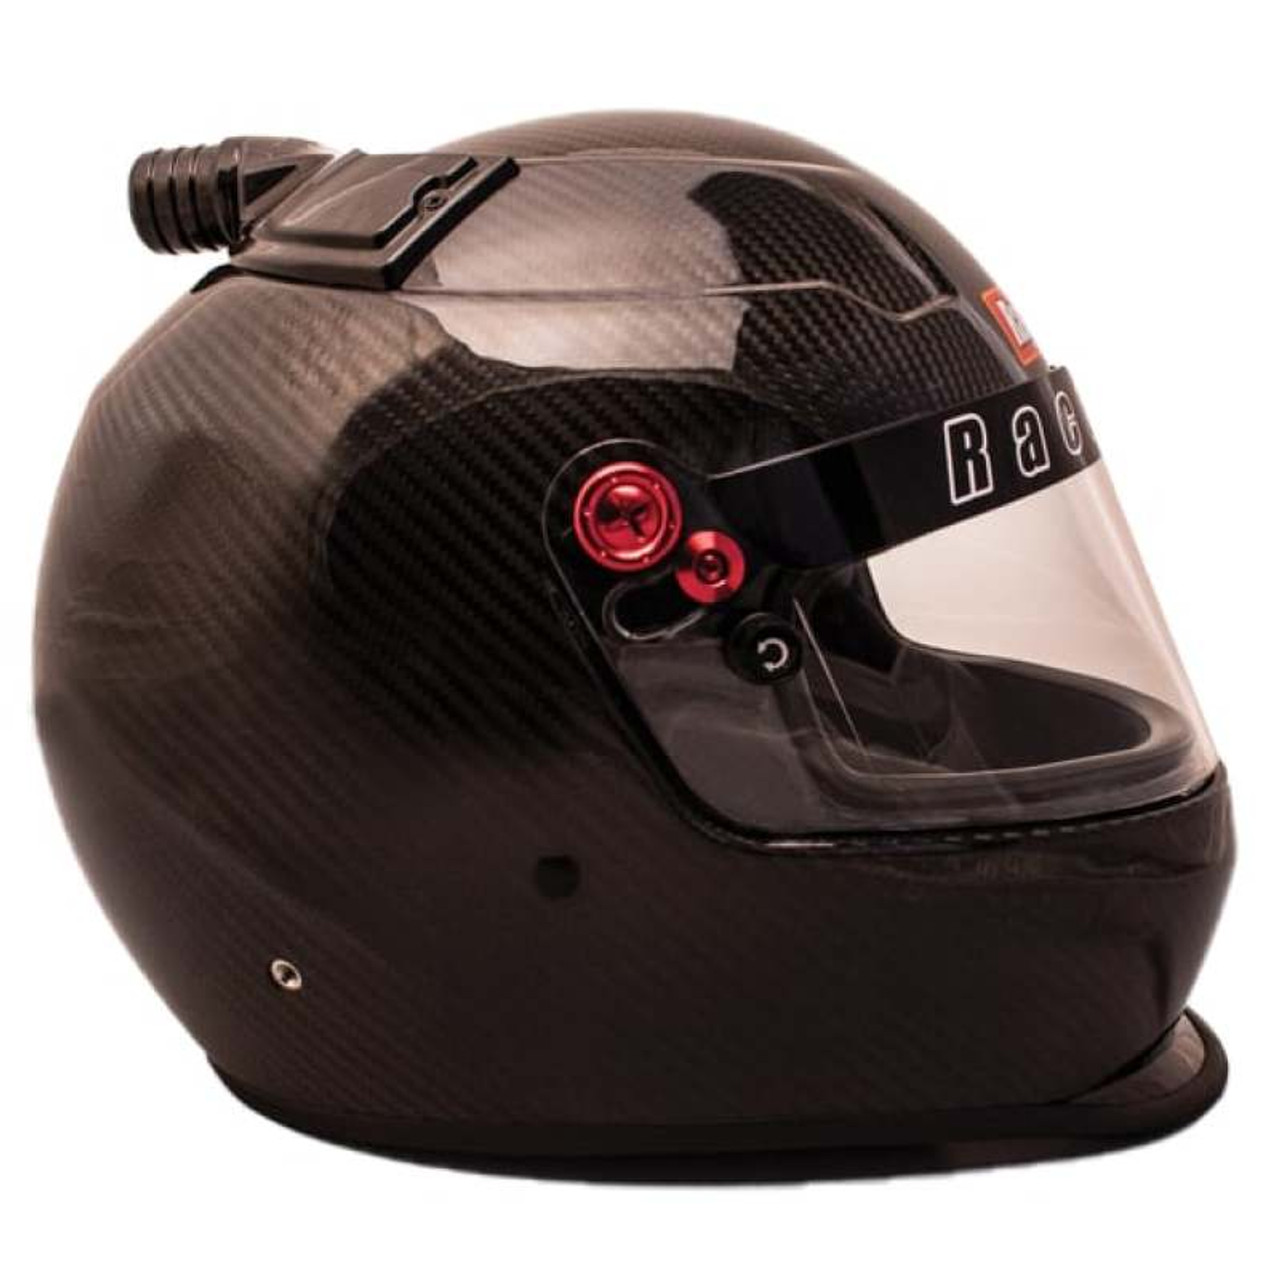 RaceQuip PRO20 Top Air Helmet Snell SA2020 Rated / Carbon Fiber -2X Large - 92669079 User 1